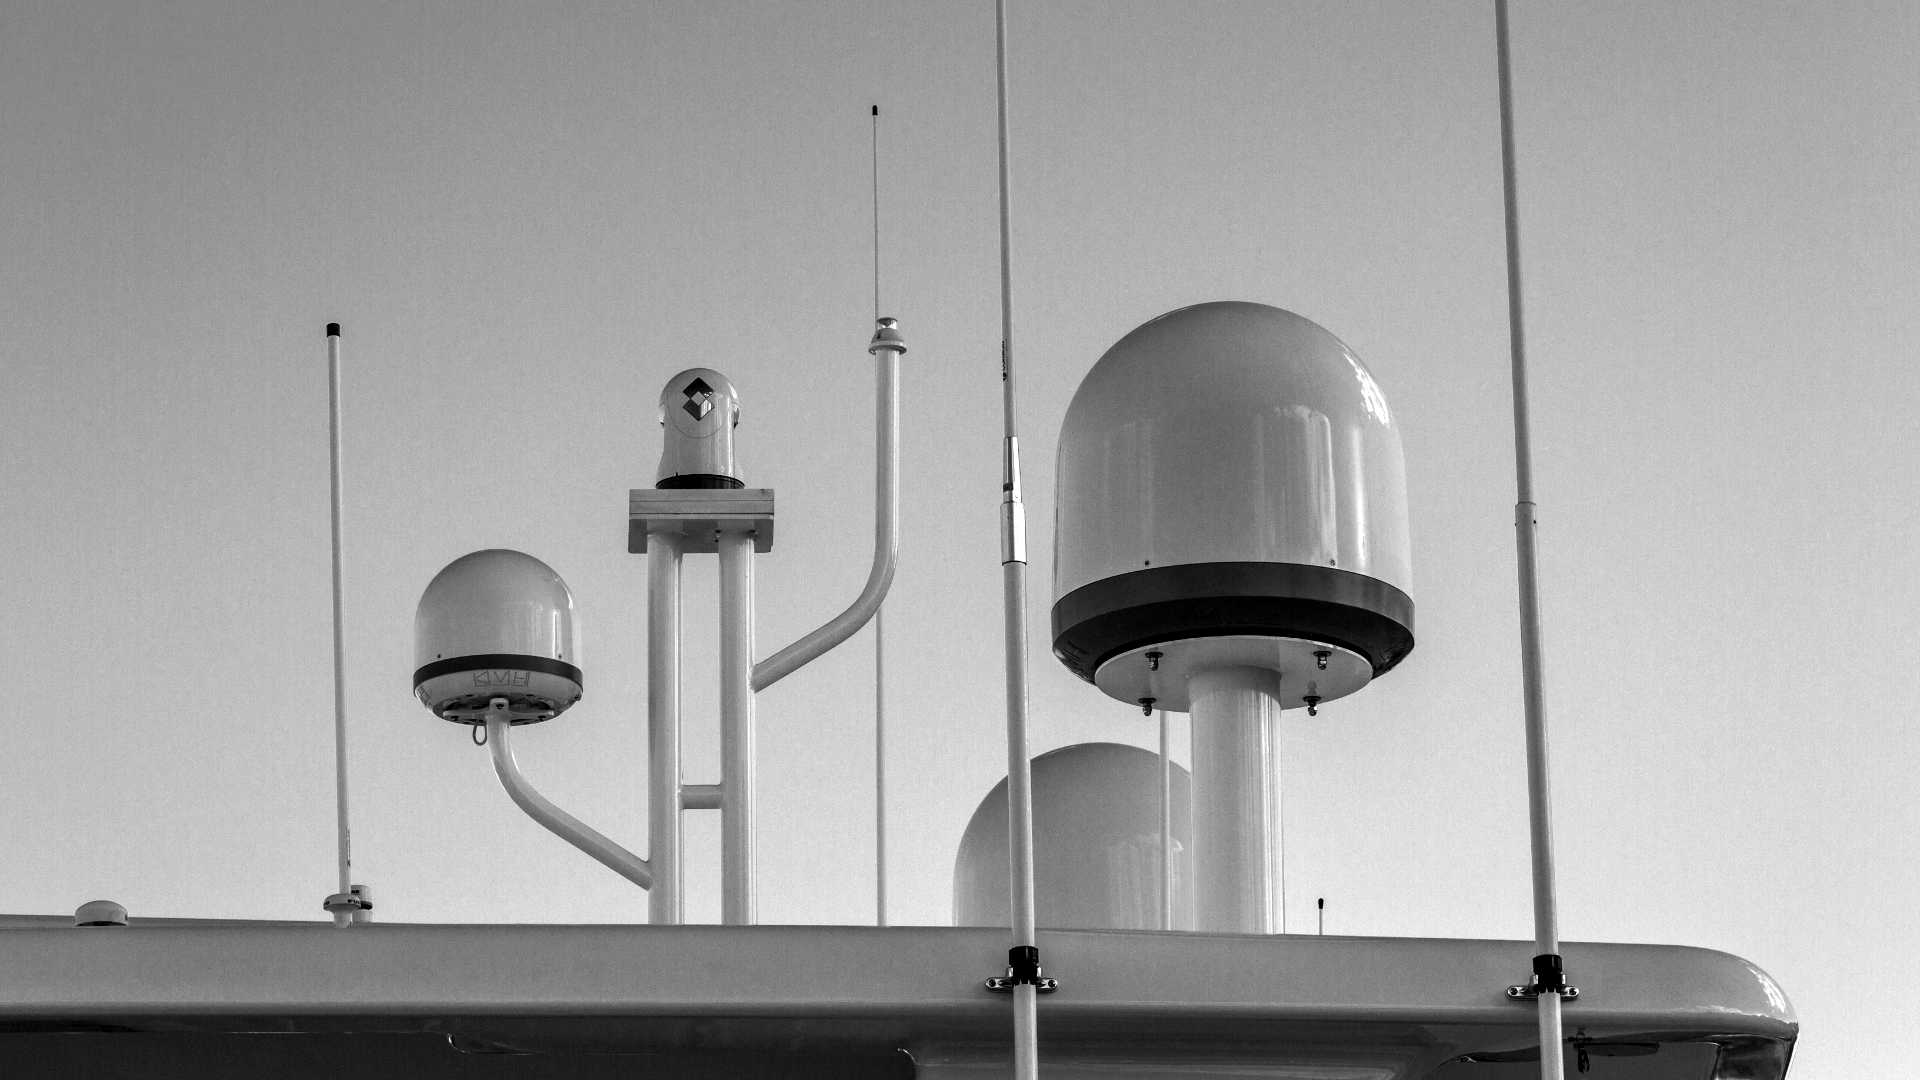 “Ship Antennas" by Tony Webster, used under CC BY SA 2.0 / Cropped, desaturated, resampled and recoloured from original